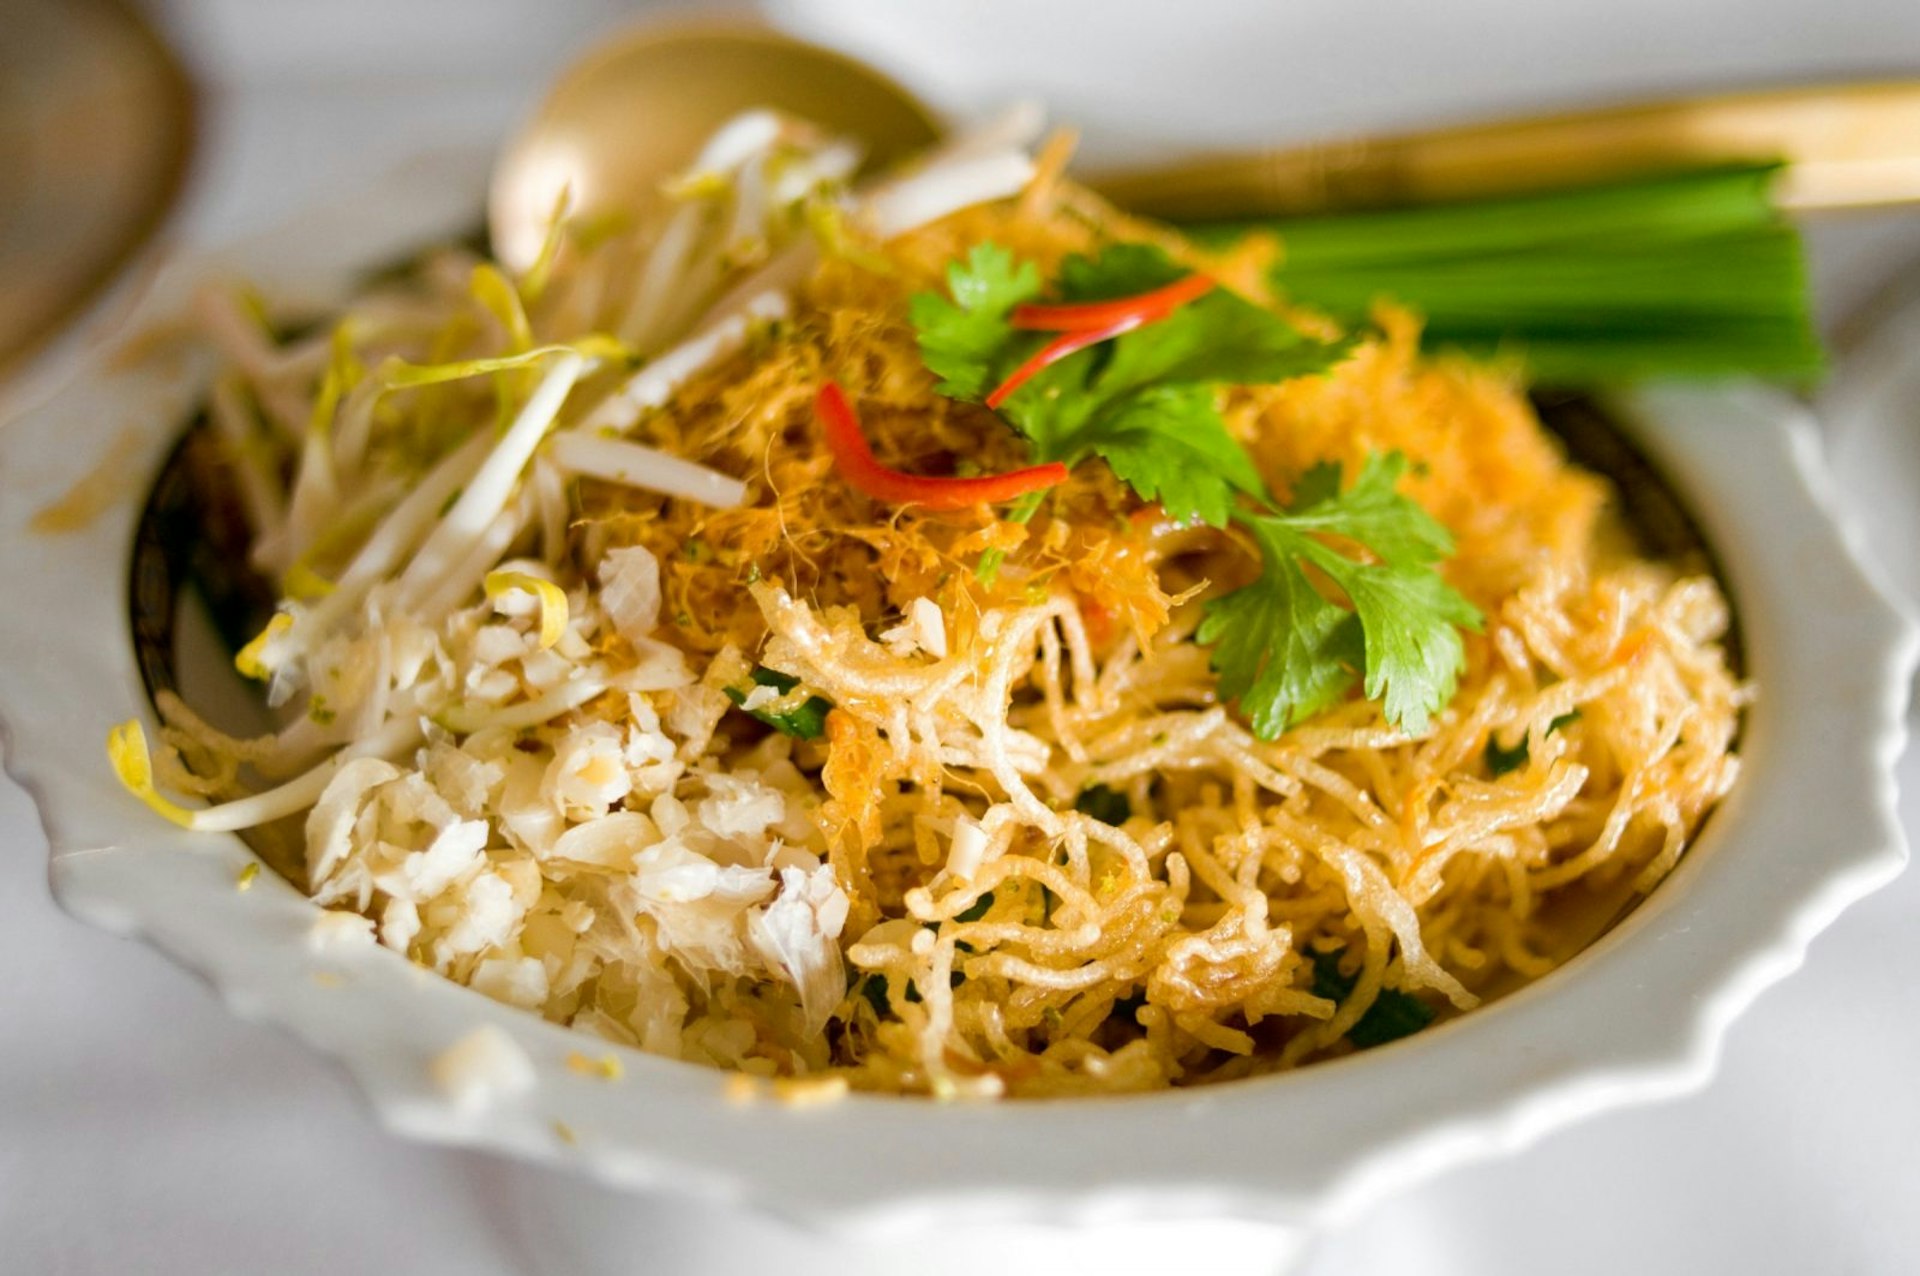 A dish of mee grorp, a dish of crispy fried noodles, as served in Bangkok © Austin Bush / Lonely Planet